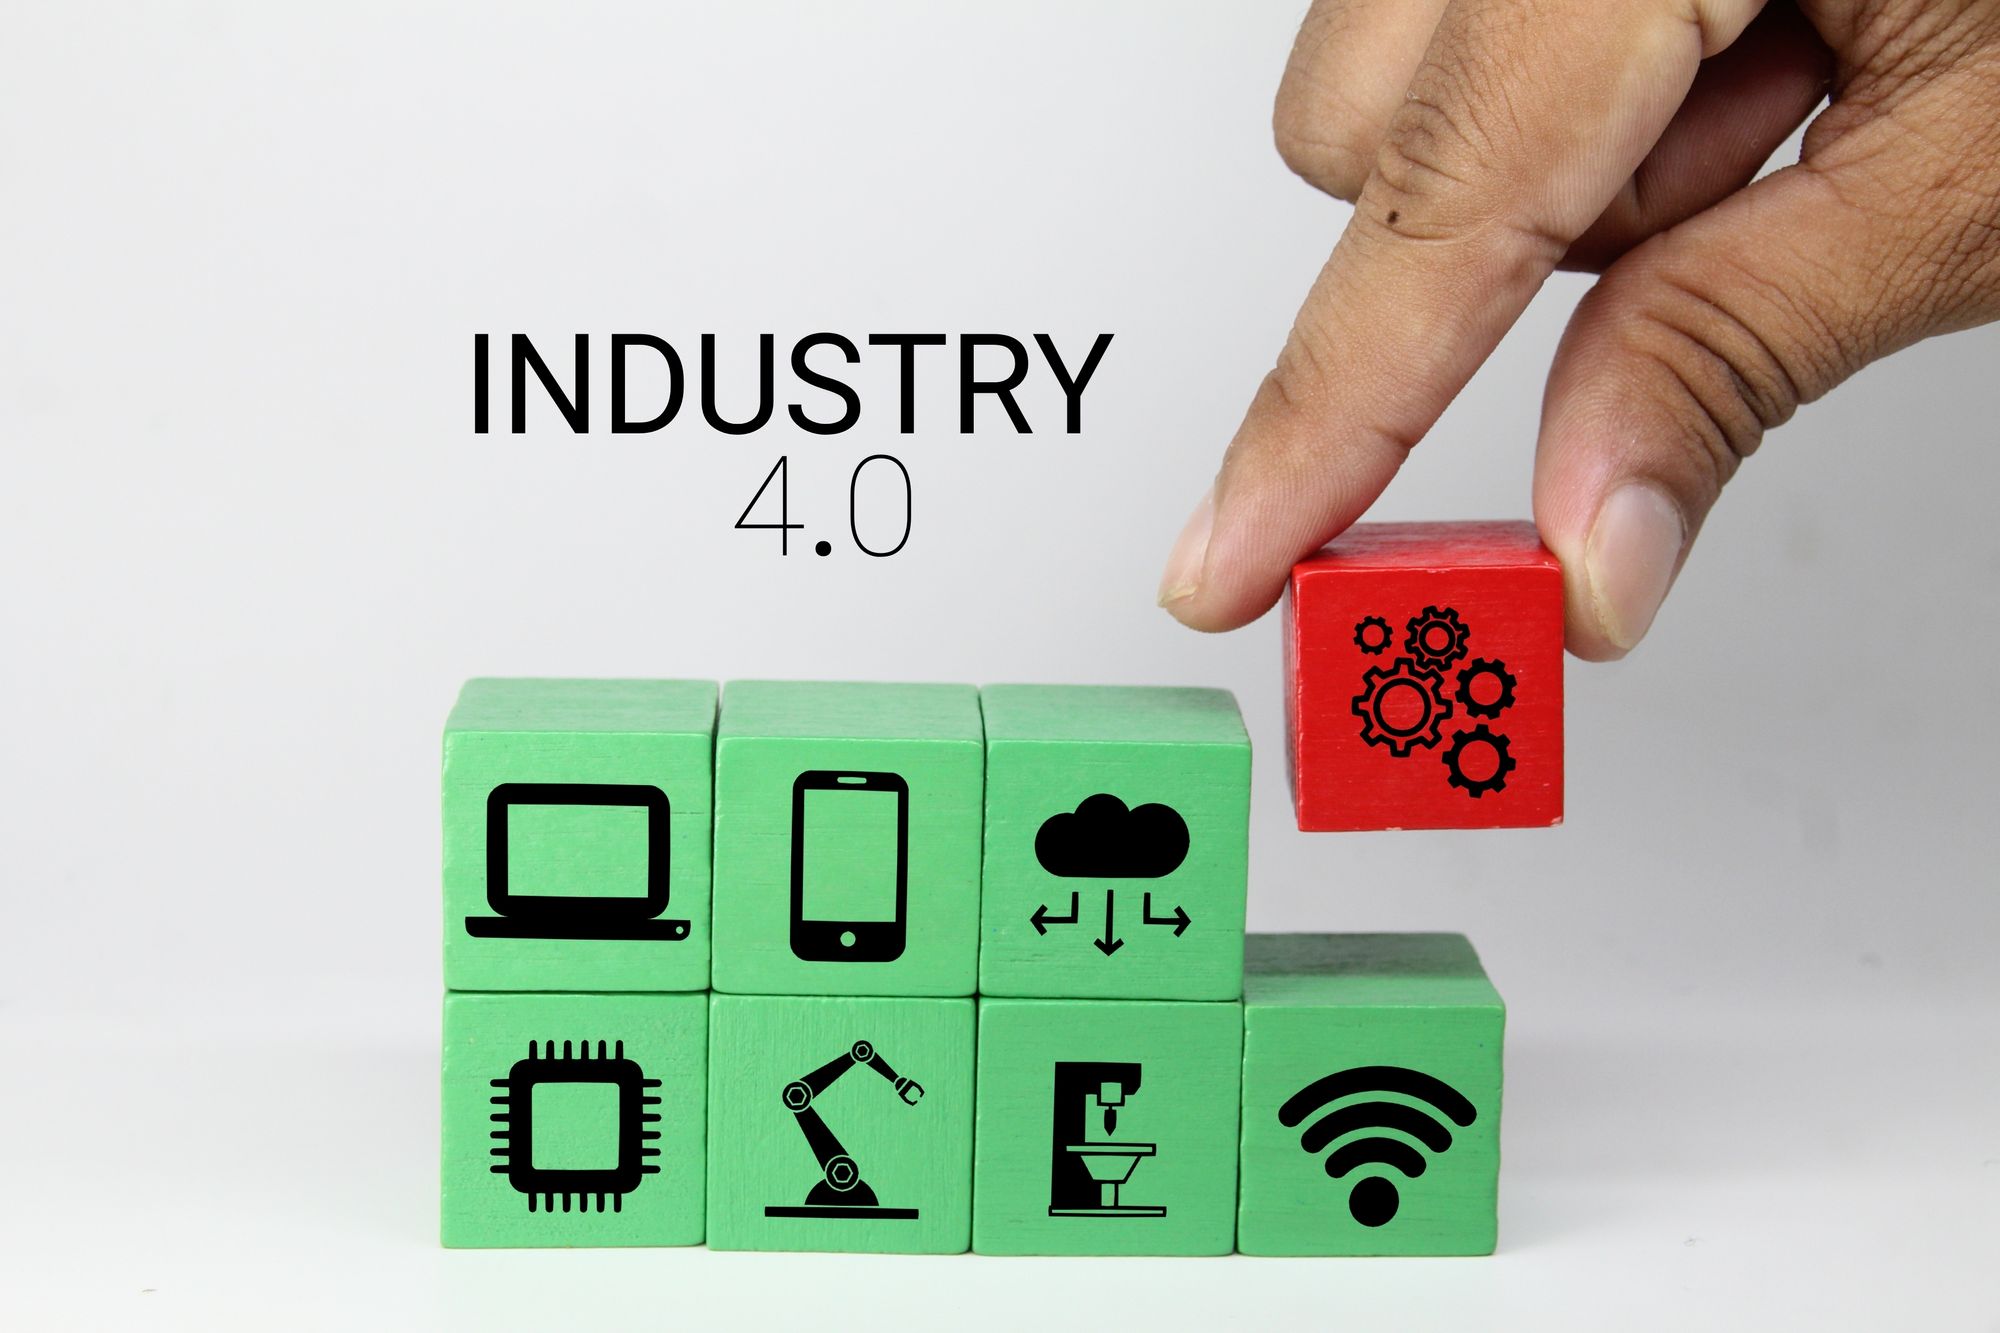 Industry 4.0: the fourth industrial revolution and its technologies.